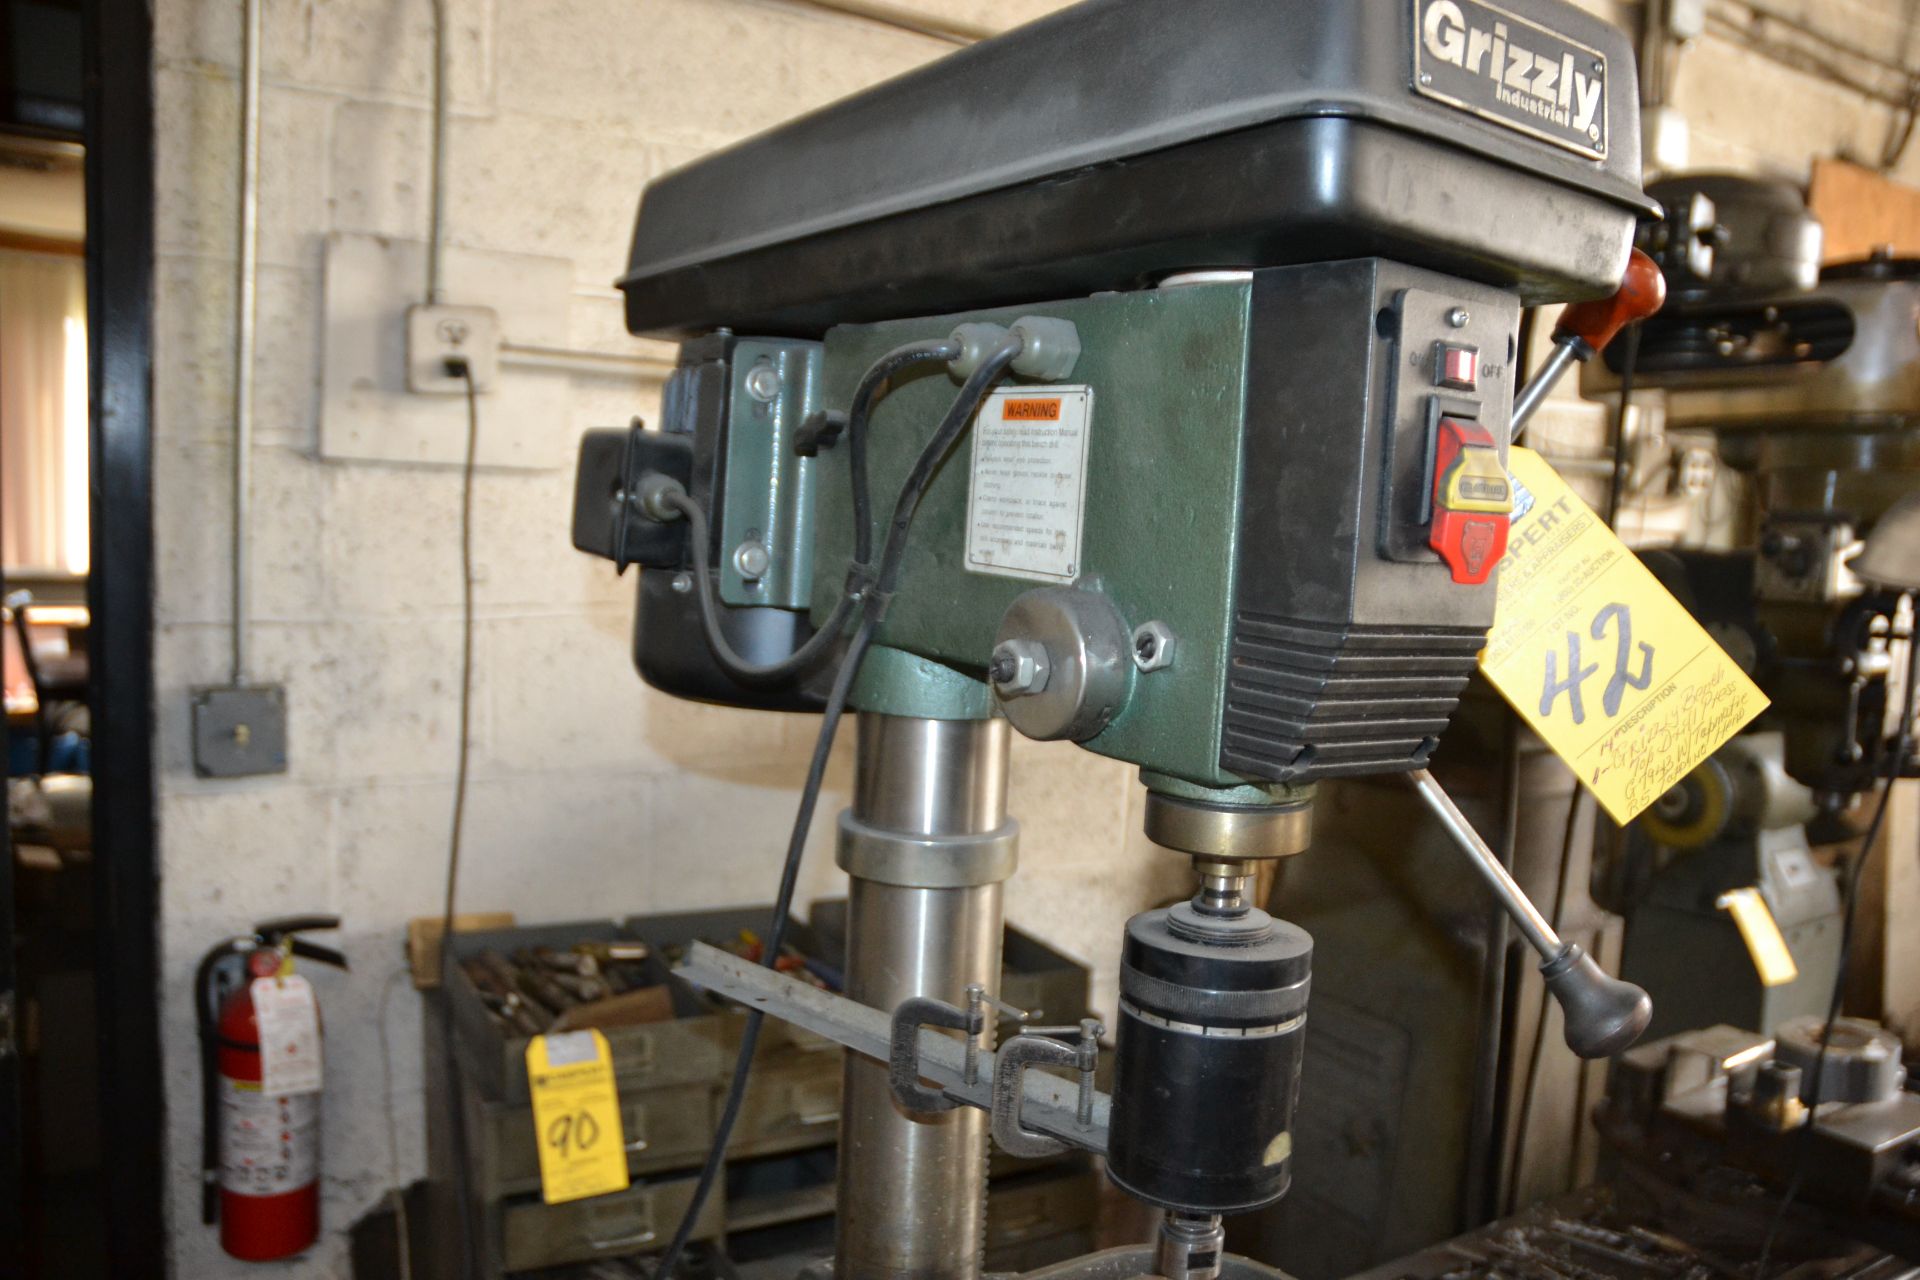 14" Grizzly Bench Top Drill Press, G7943 with R5 Rapmatic Tapping Head - Image 2 of 2